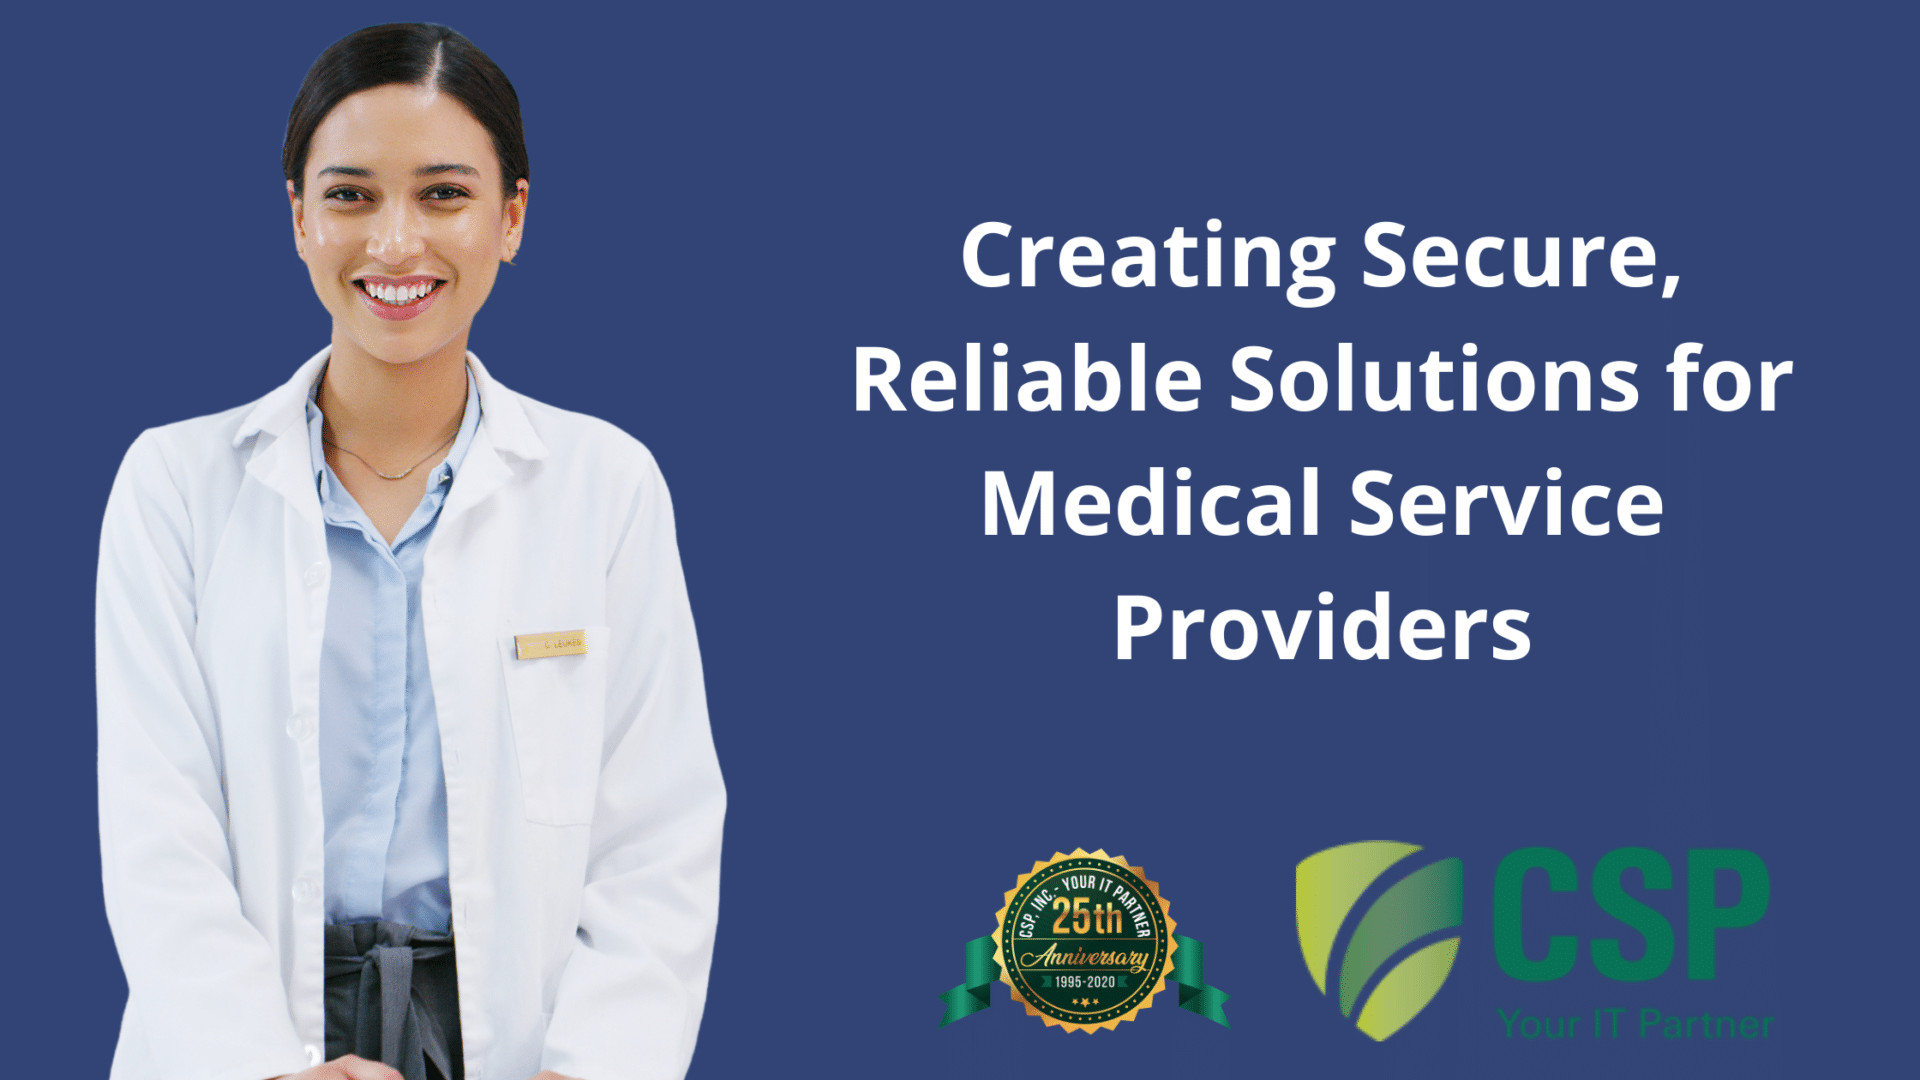 Creating Secure, Reliable Solutions for Medical Service Providers